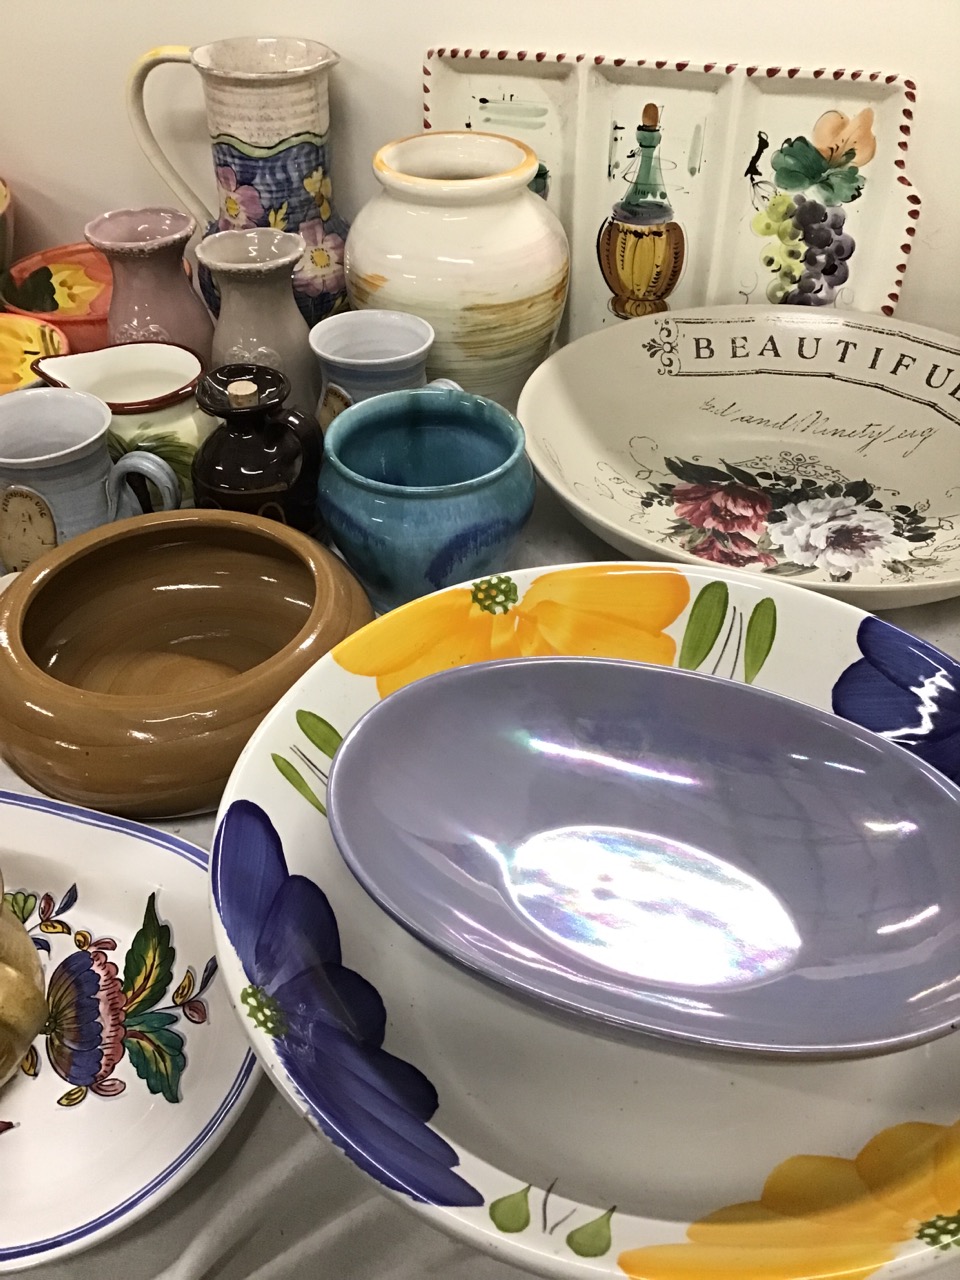 Miscellaneous ceramics - studio pottery bowls, mugs, vases & candle holder, a handpainted art deco - Image 3 of 3